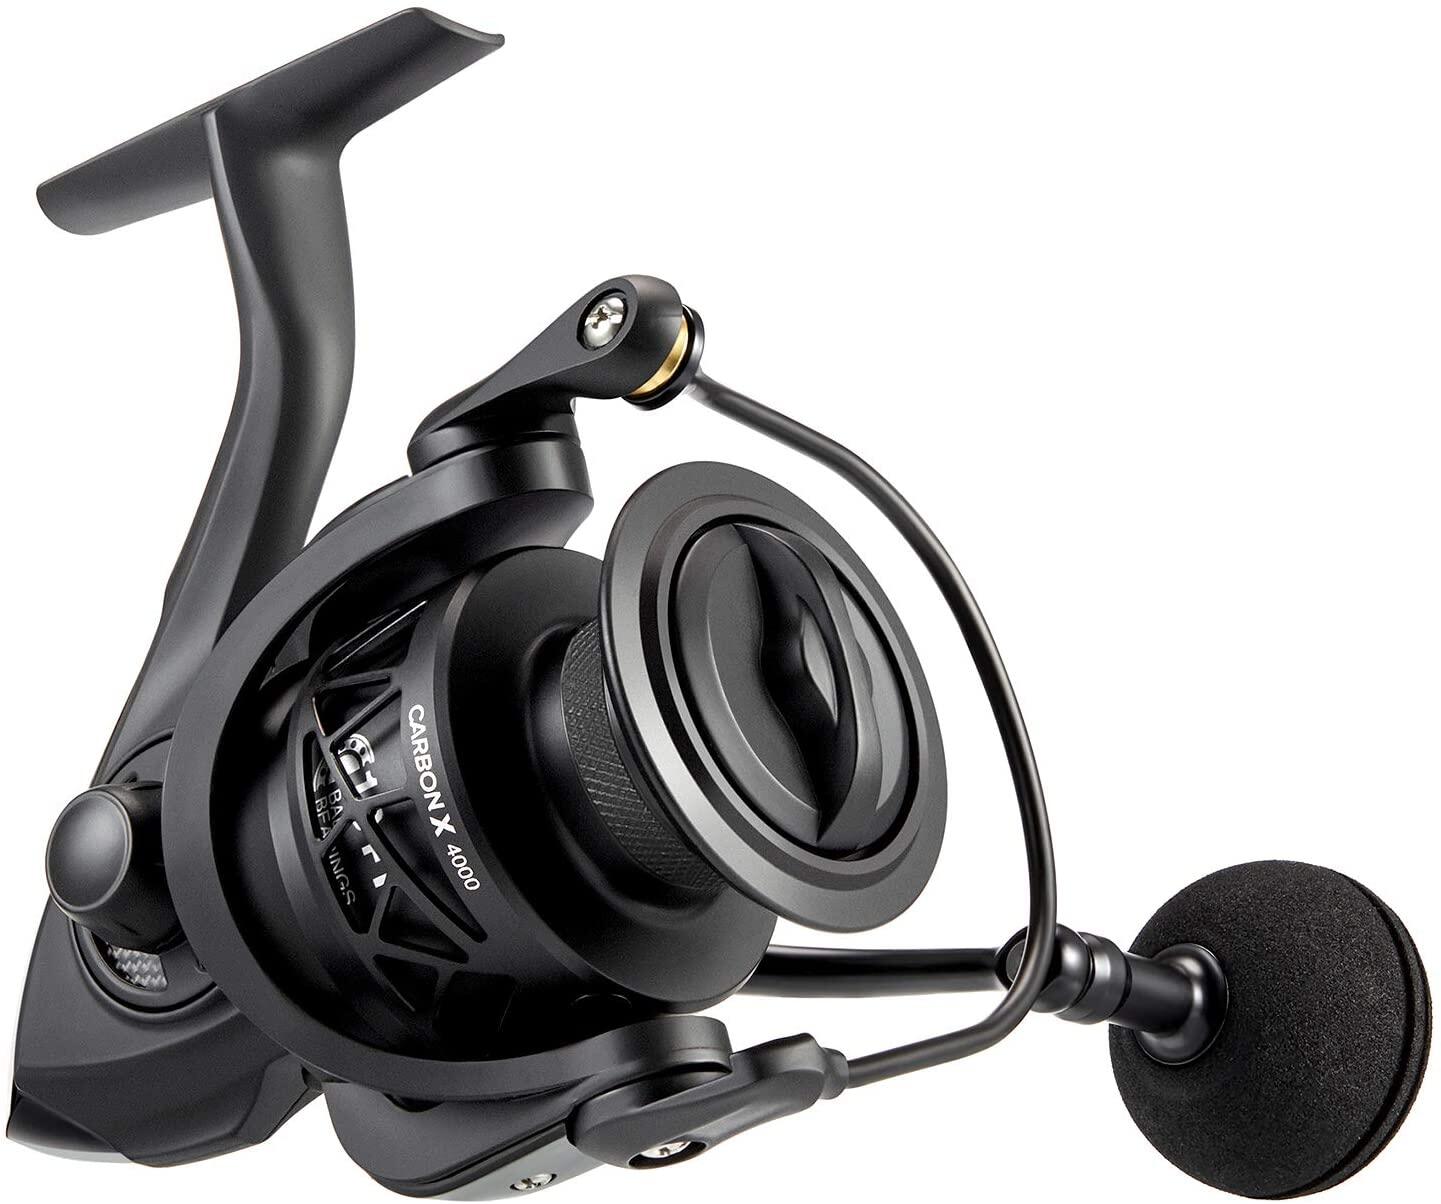 Carbon Fiber Drag for Live Liner Bait Fishing Action Baitrunner for Freshwater Saltwater 3000-6000 Piscifun Carnivore X Baitfeeder Spinning Reel with A Spare Spool 4.3:1-5.1:1 Shielded Stainless Steel BB 